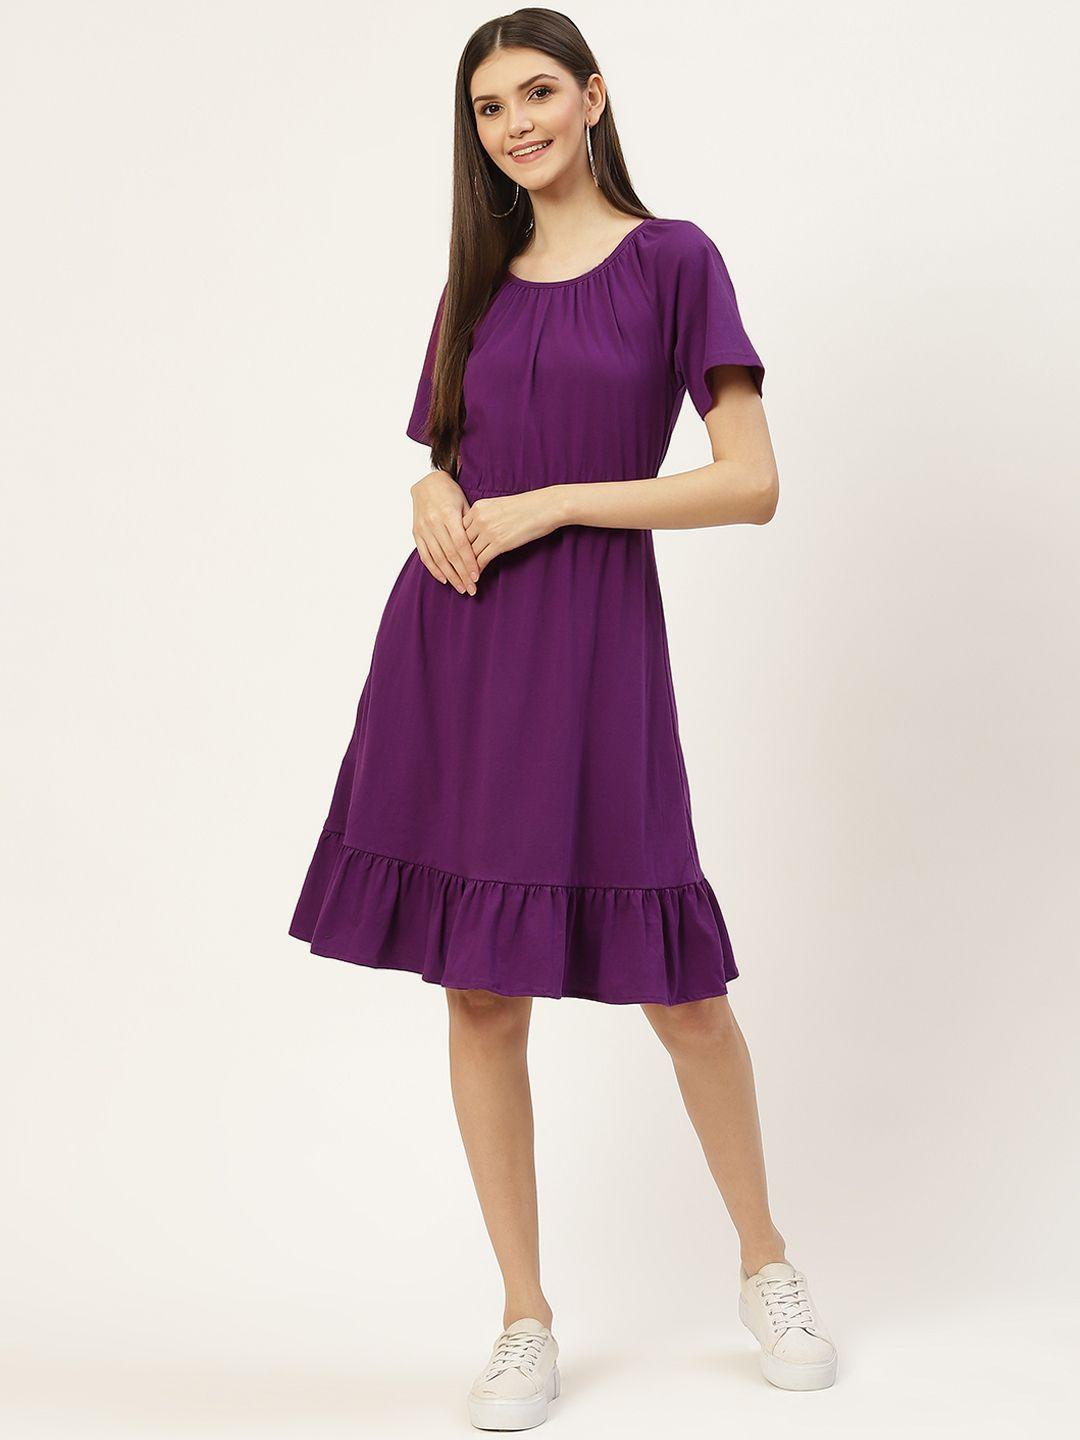 brinns-purple-solid-pure-cotton-fit-and-flare-midi-dress